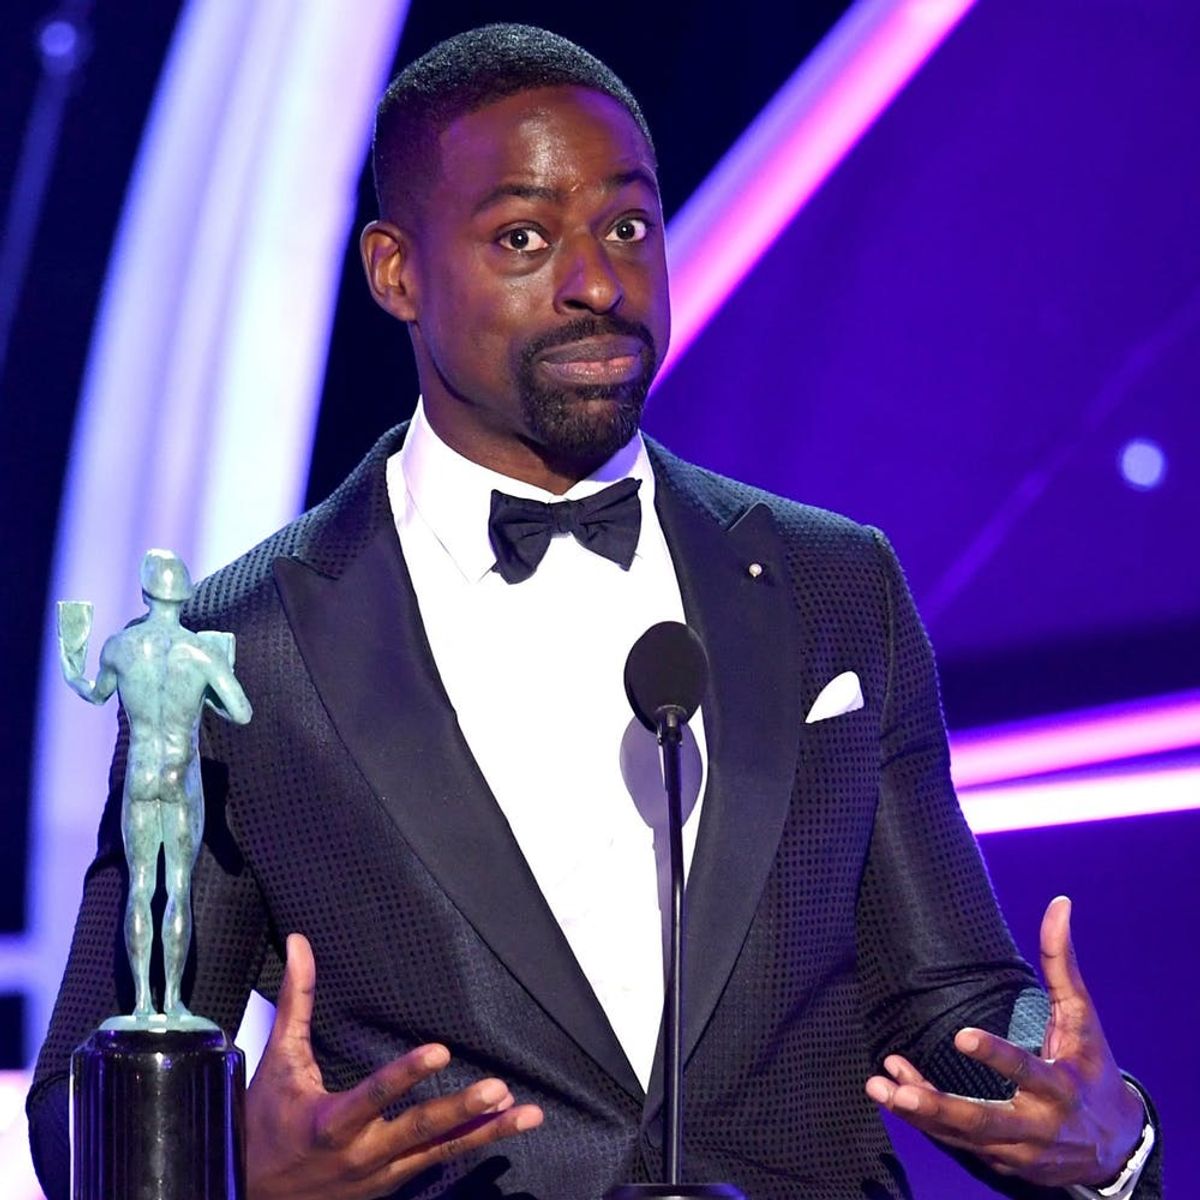 ‘This Is Us’ Star Sterling K. Brown Made History at the 2018 SAG Awards